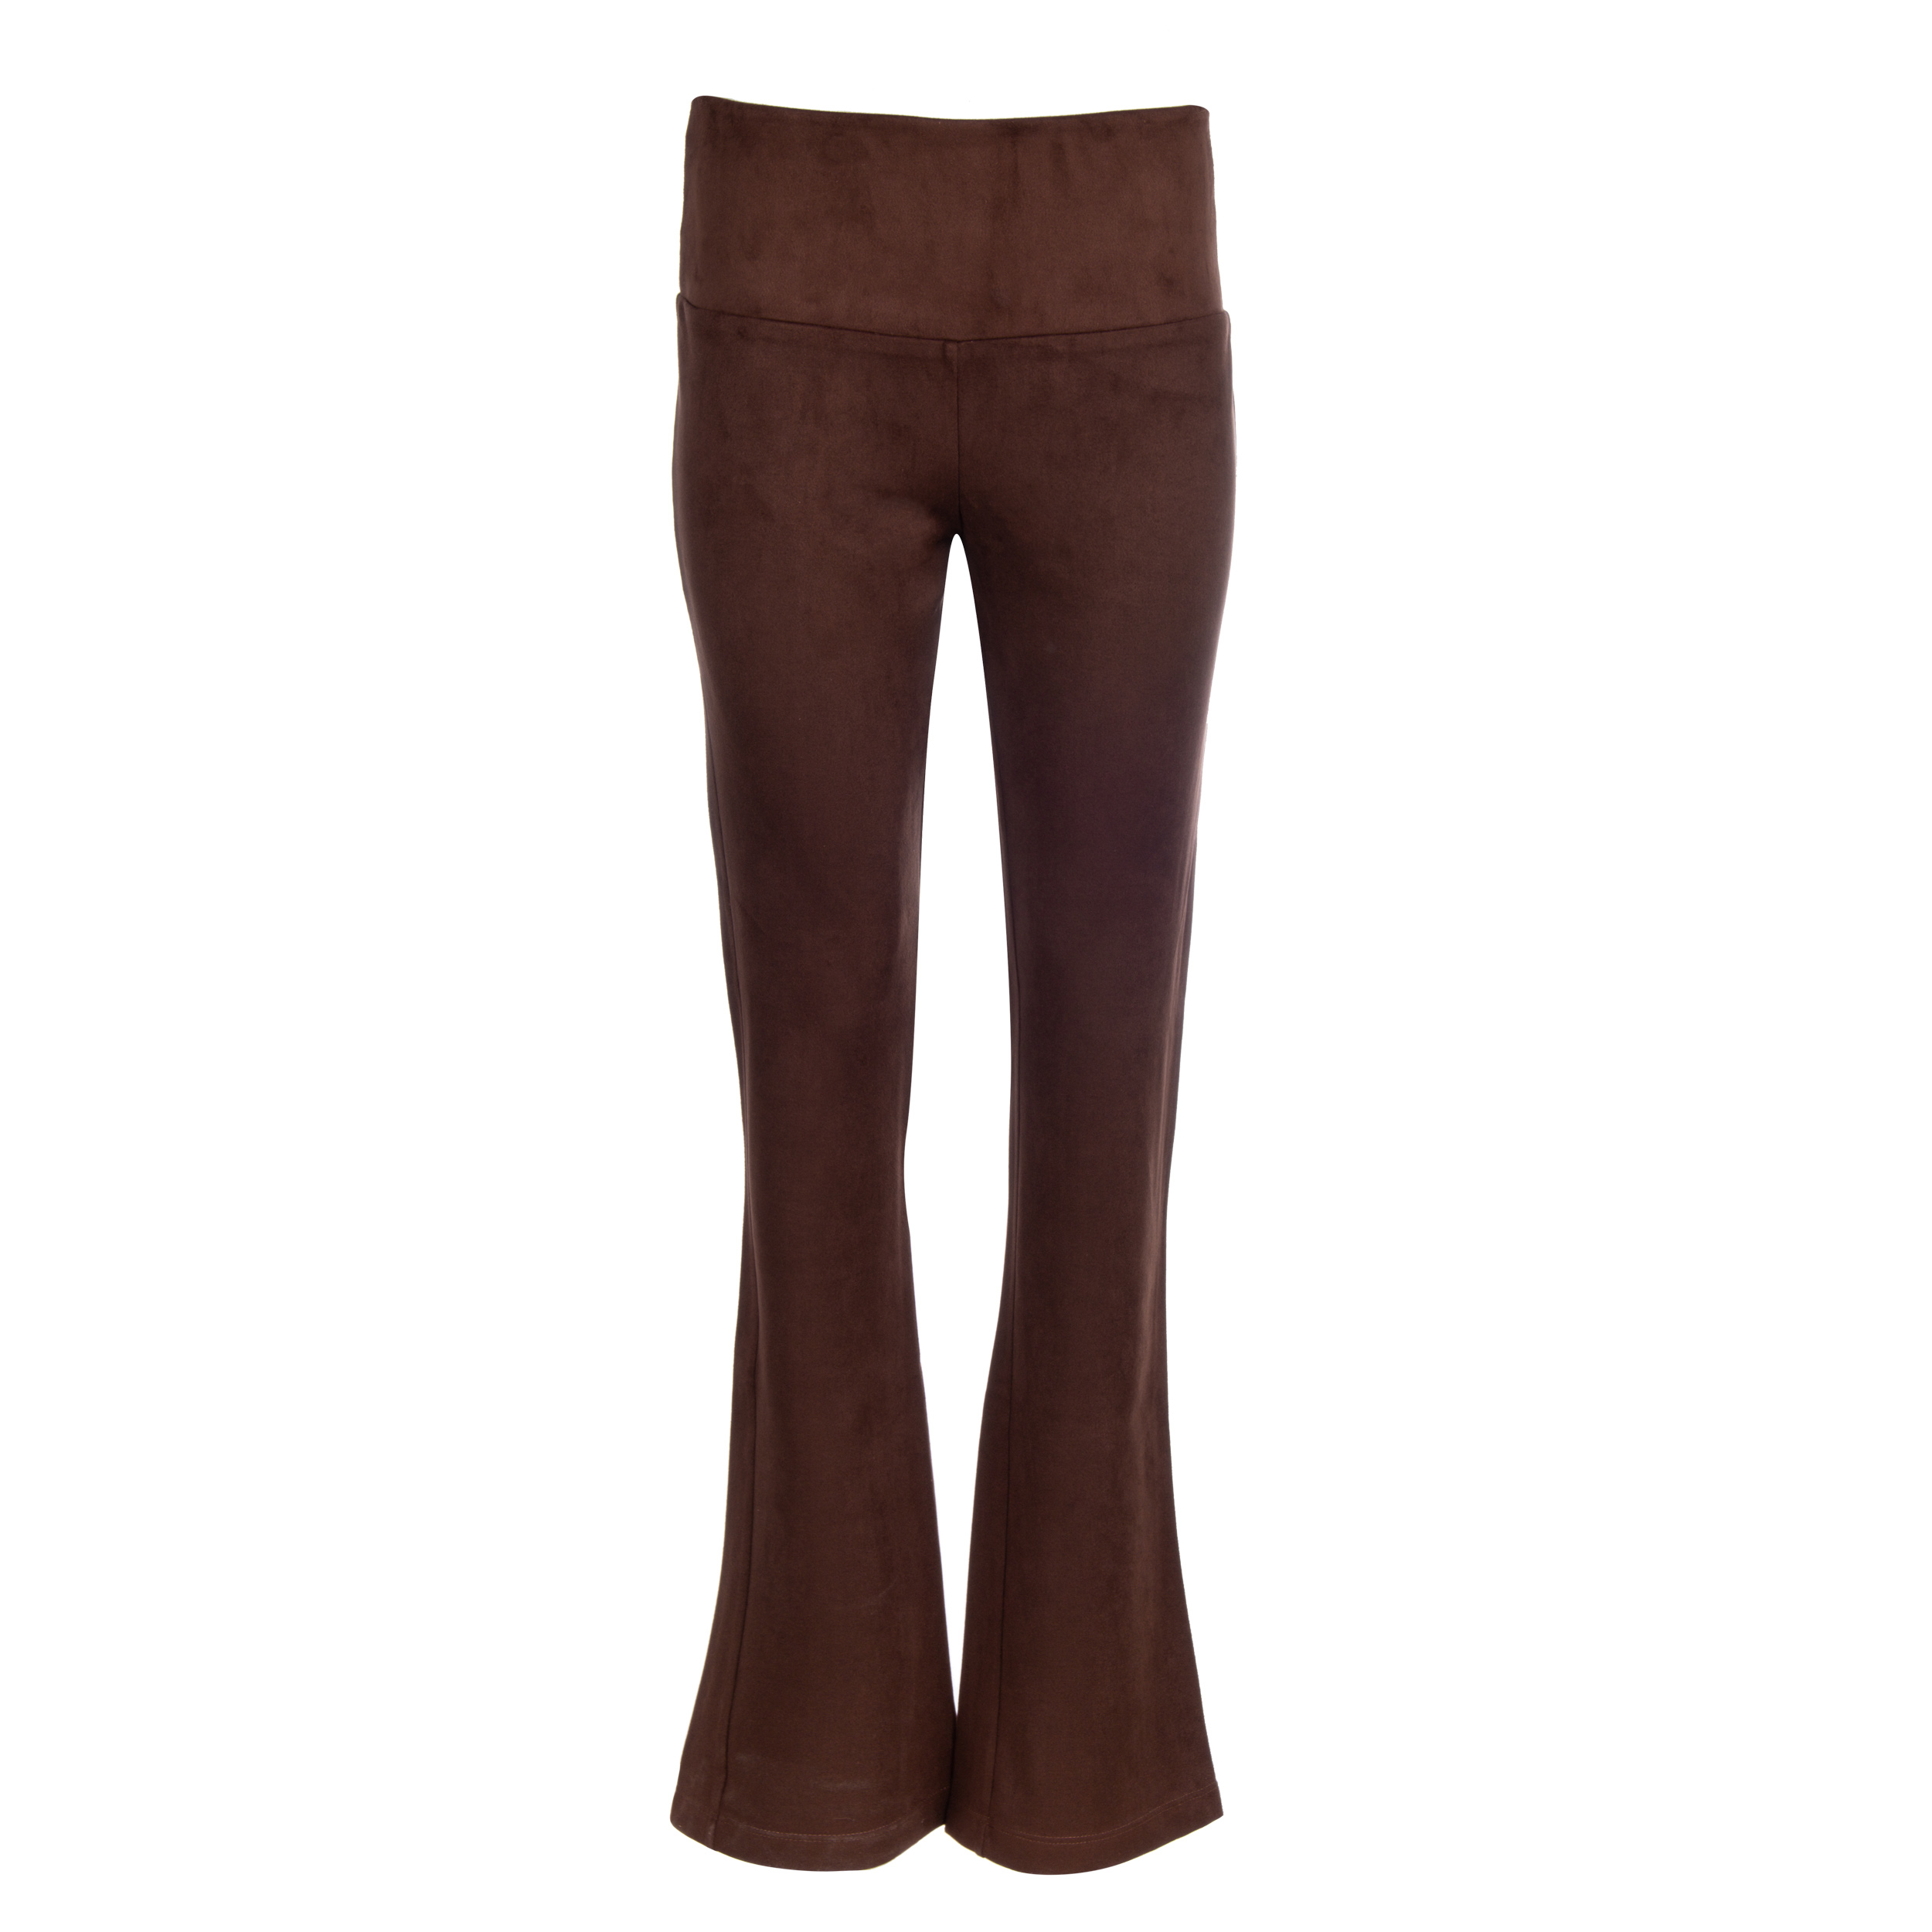 Flat image of brown micro suede pants by Ala von Auersperg